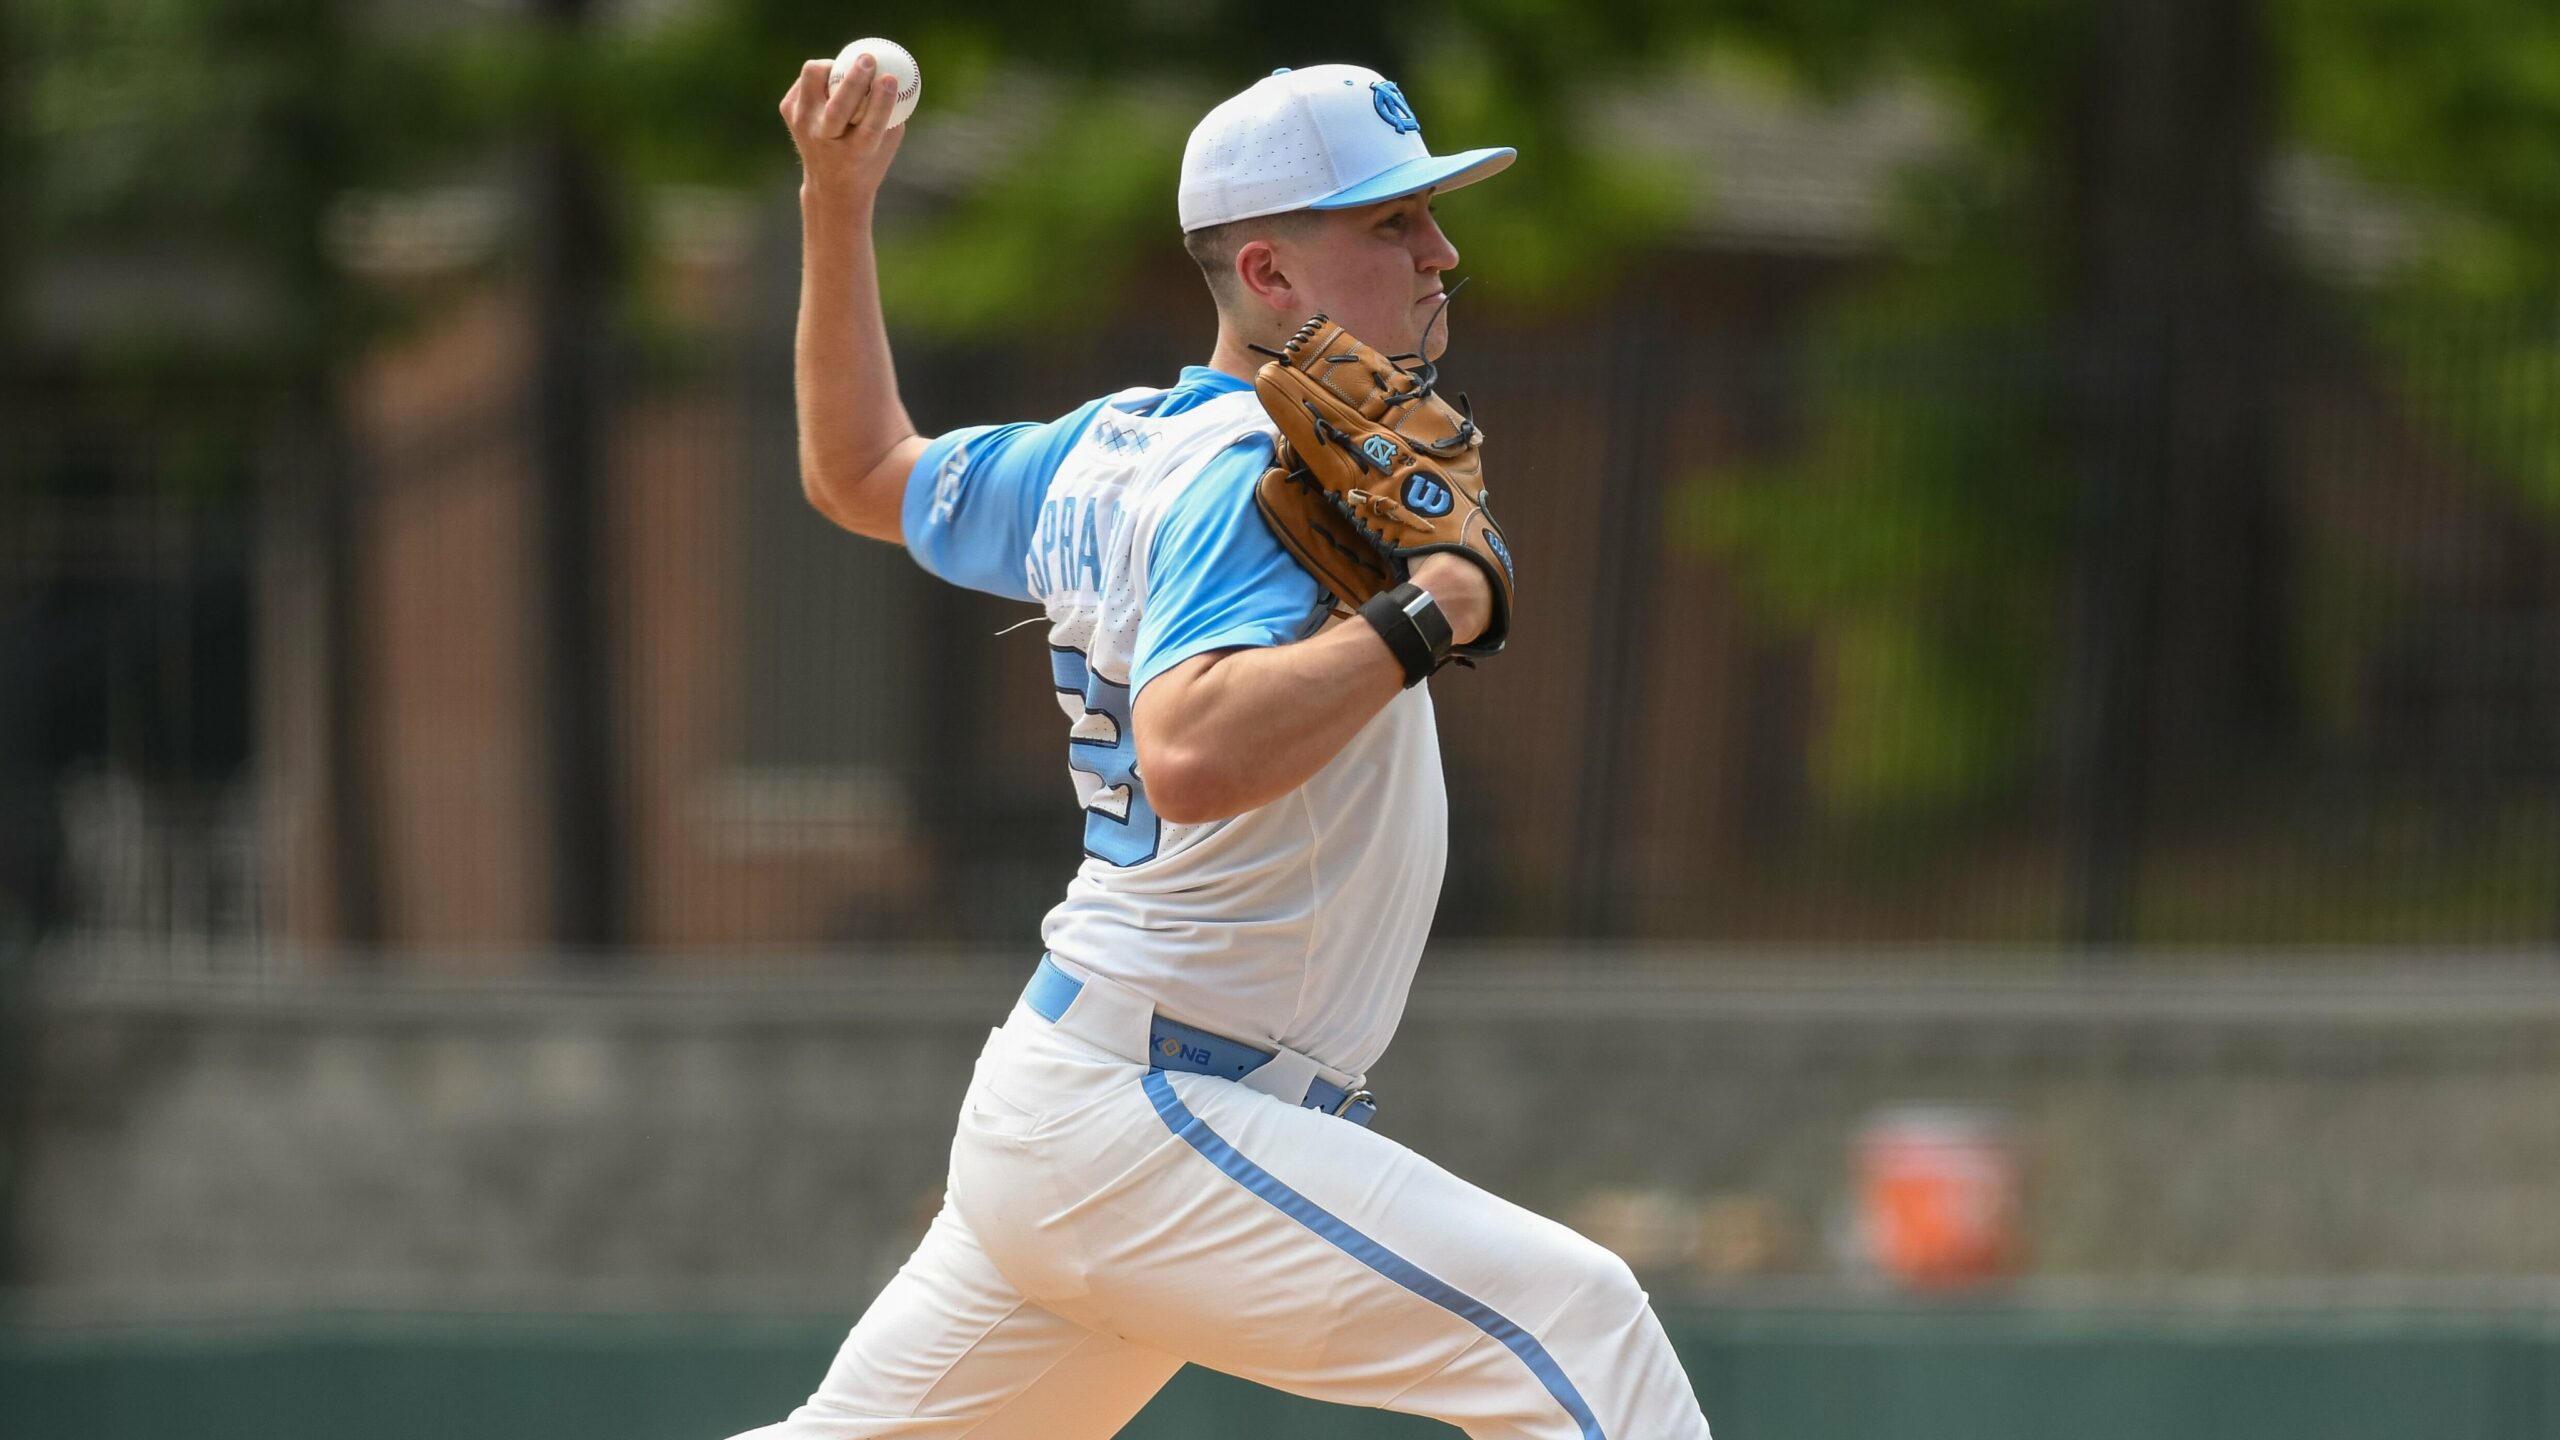 No. 15 UNC Baseball leans on pitching, defense to tame Hokies, claim series win